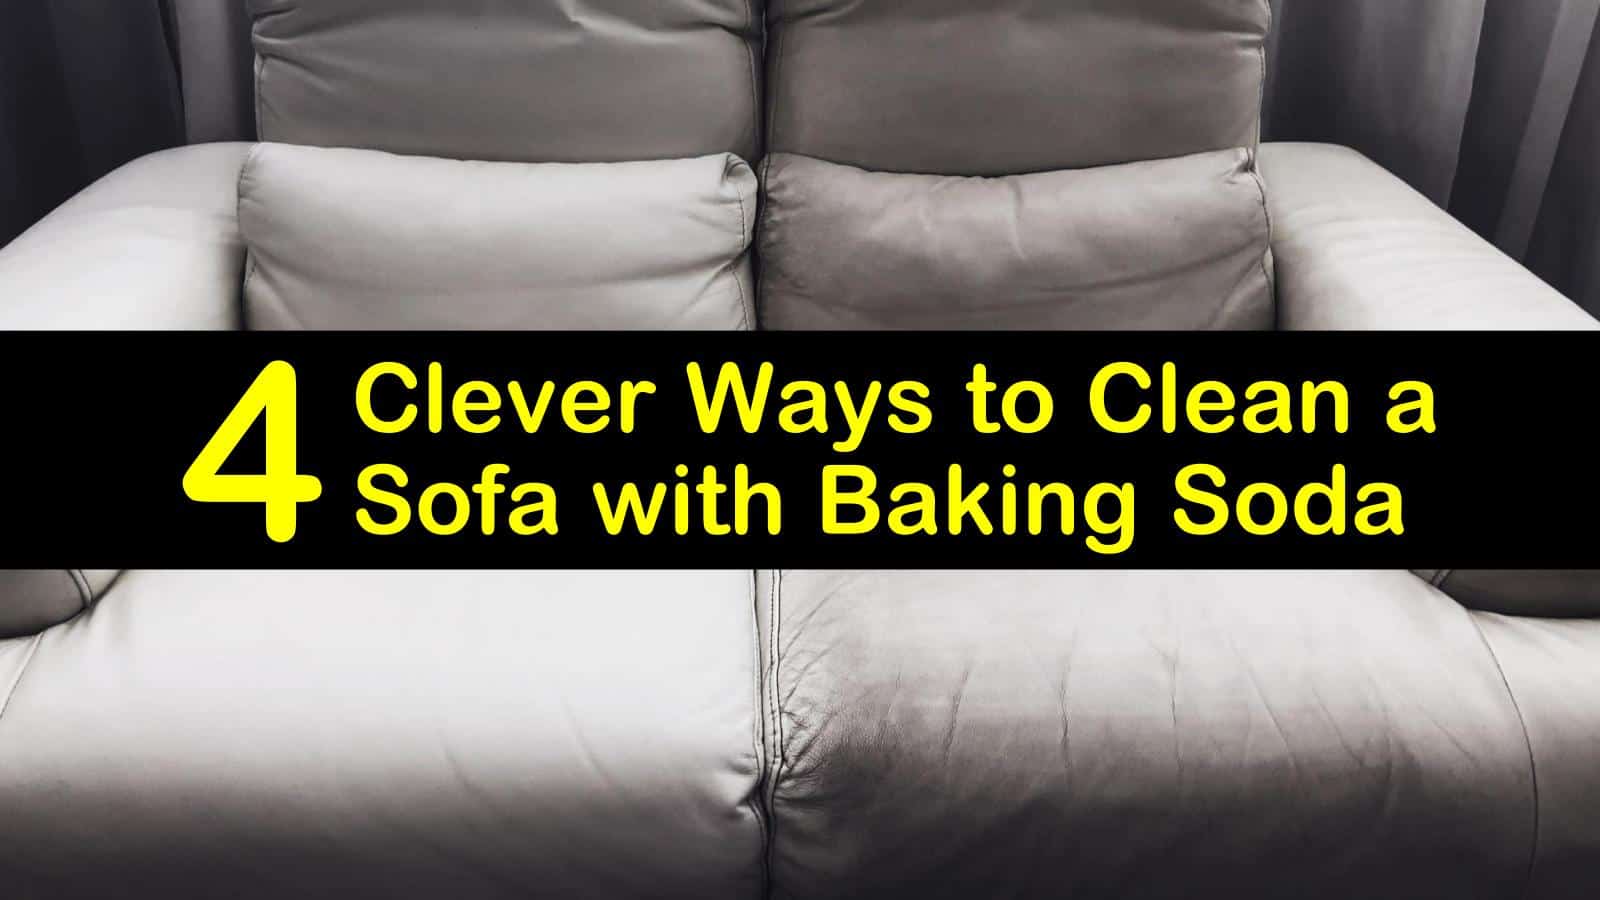 Clean A Sofa With Baking Soda, How To Clean A Very Dirty White Leather Sofa